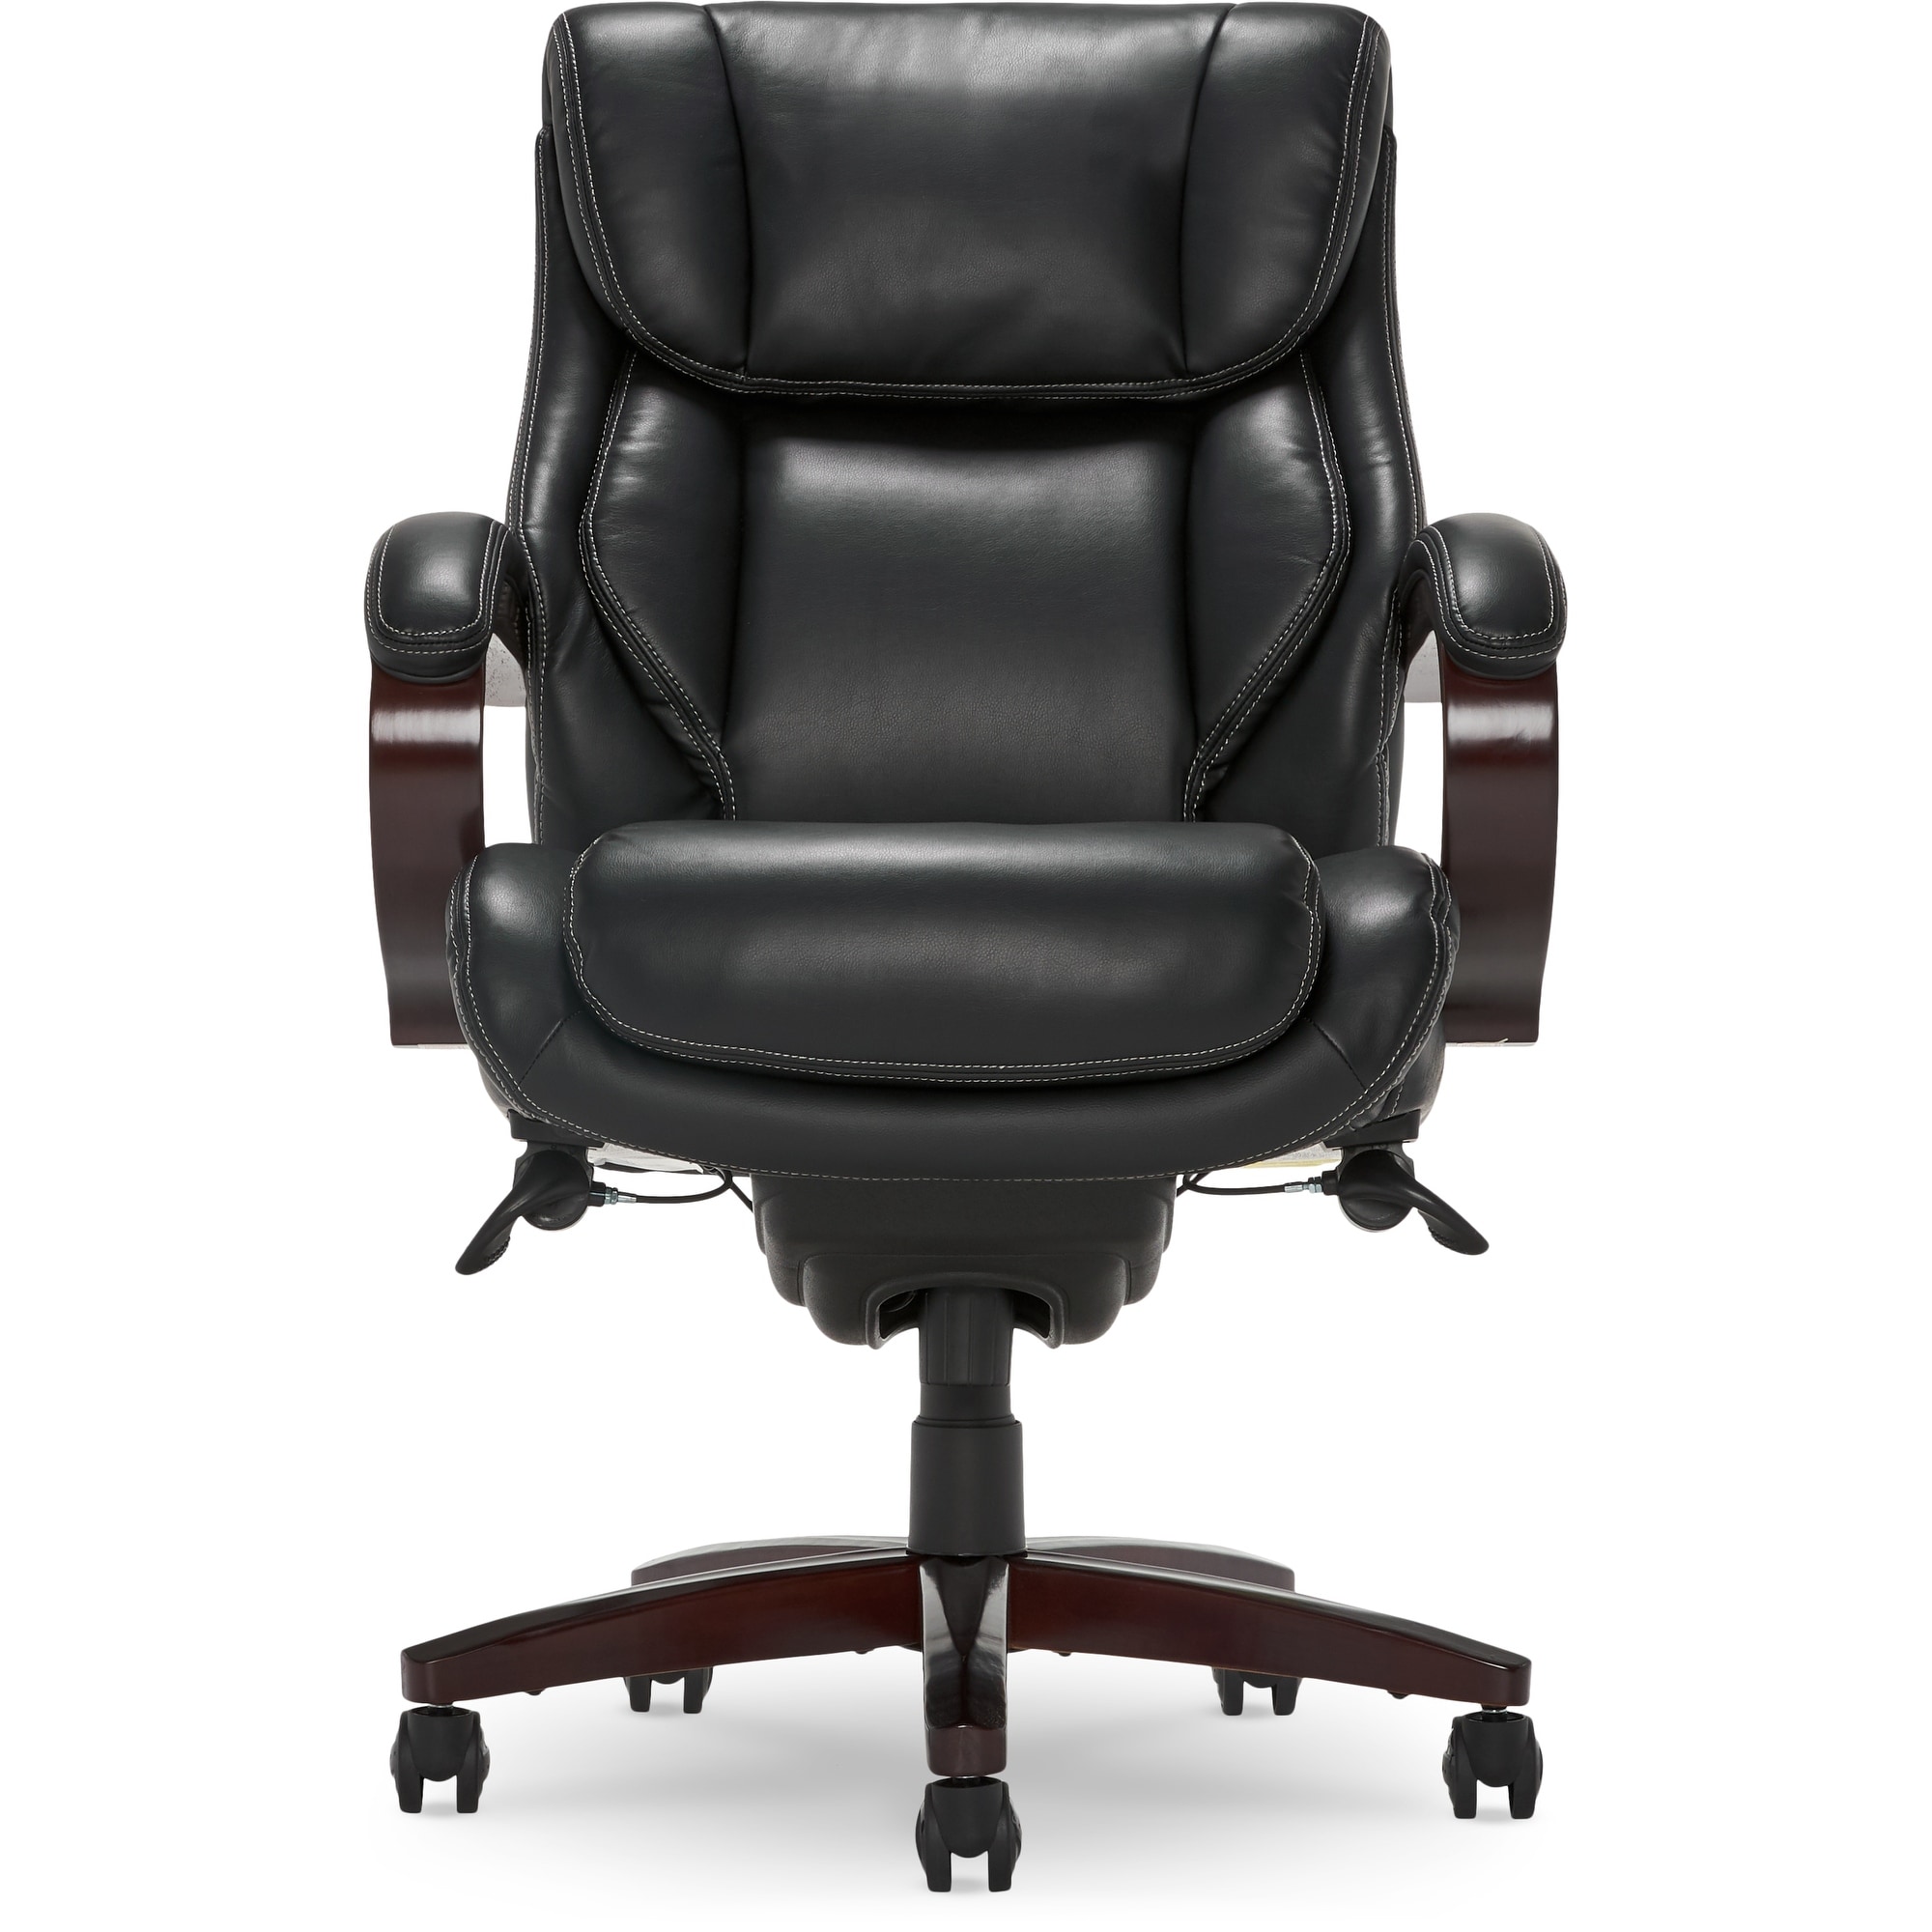 https://ak1.ostkcdn.com/images/products/is/images/direct/ab9992091258912c5491e68fab974b45a38375f0/La-Z-Boy-Bellamy-Executive-Office-Chair.jpg